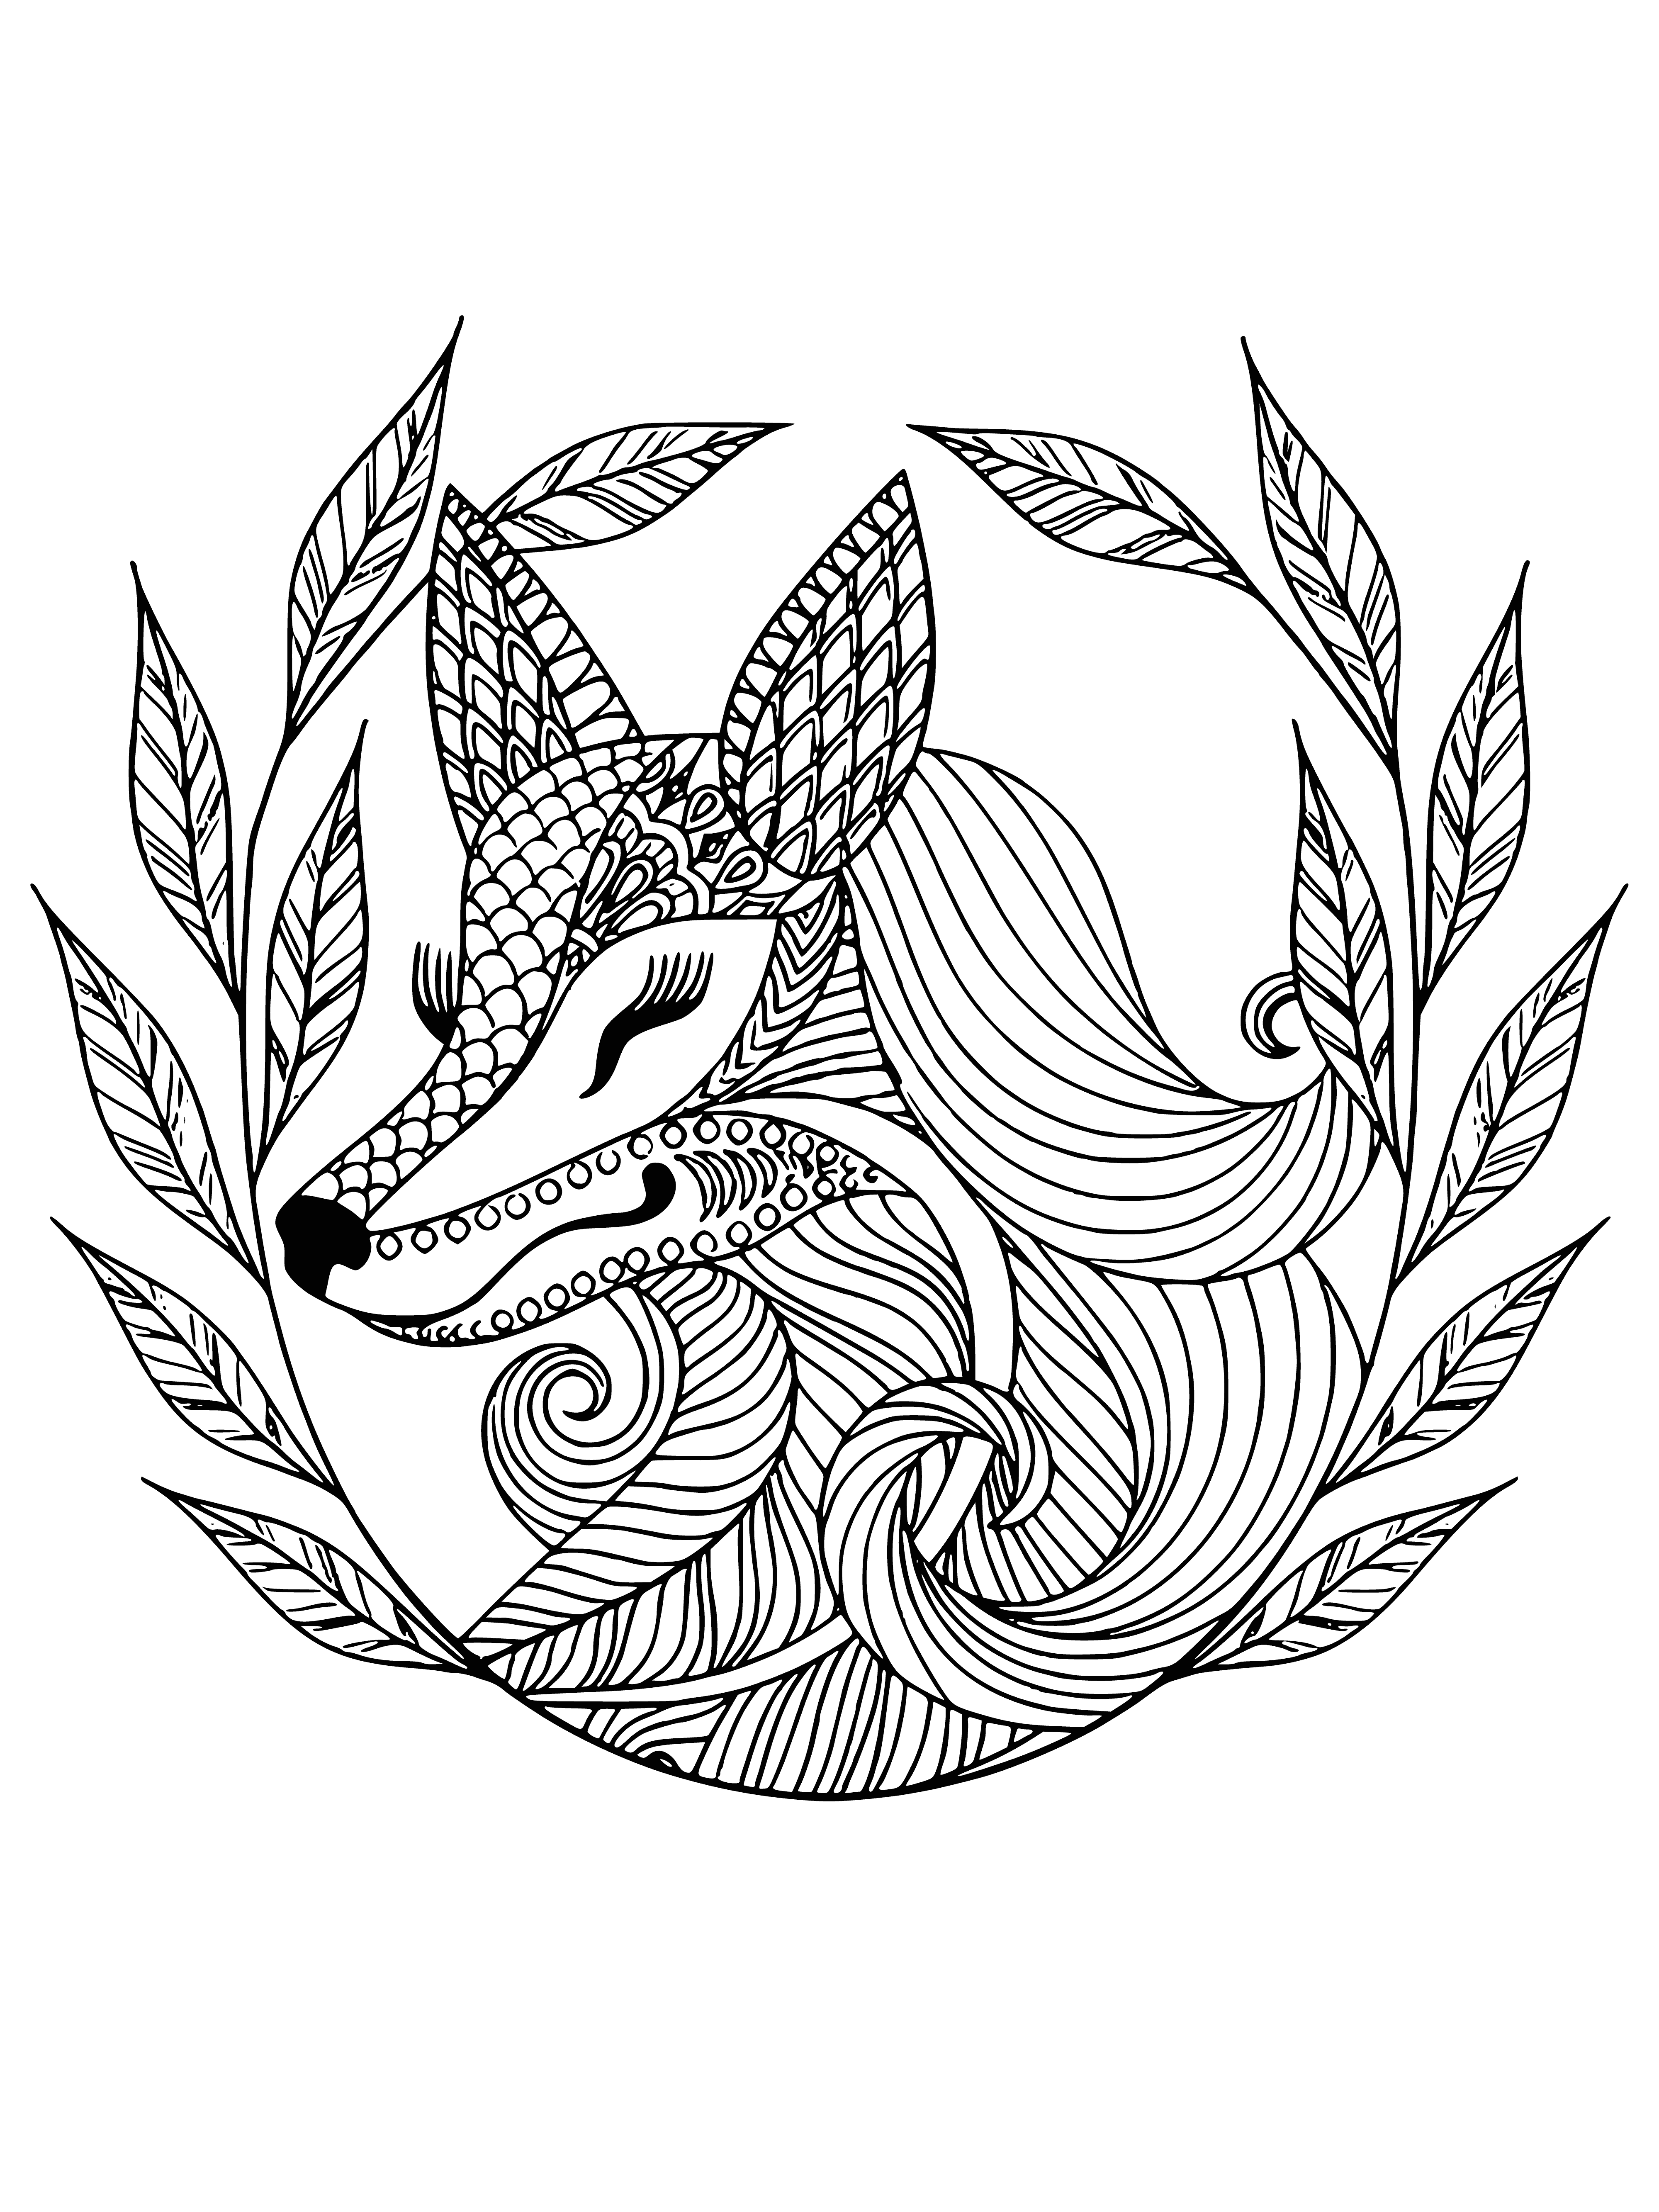 coloring page: A beautiful fox with big ears, bushy tail, and orange fur stands in a green meadow with flowers. #FoxBeauty